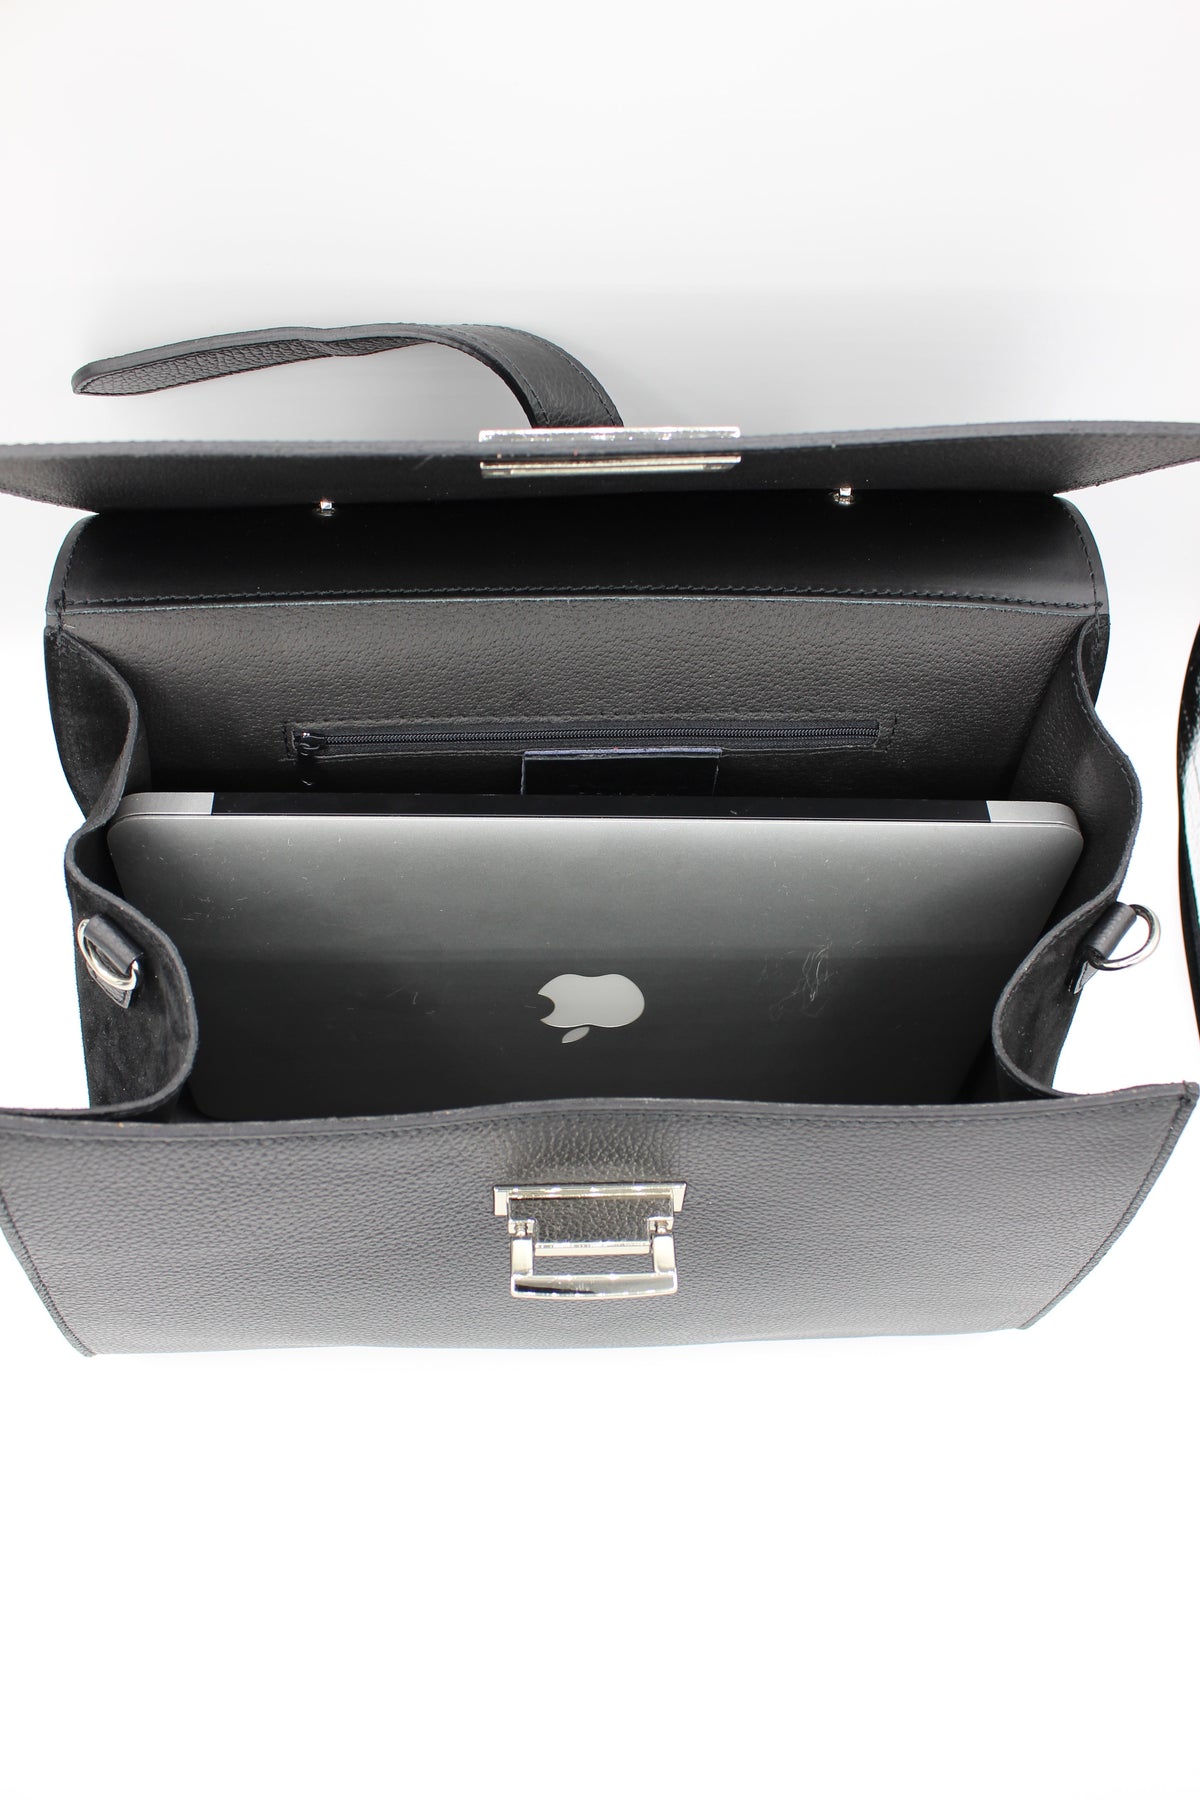 Chichi large leather & suede work bag with laptop inside (interior)